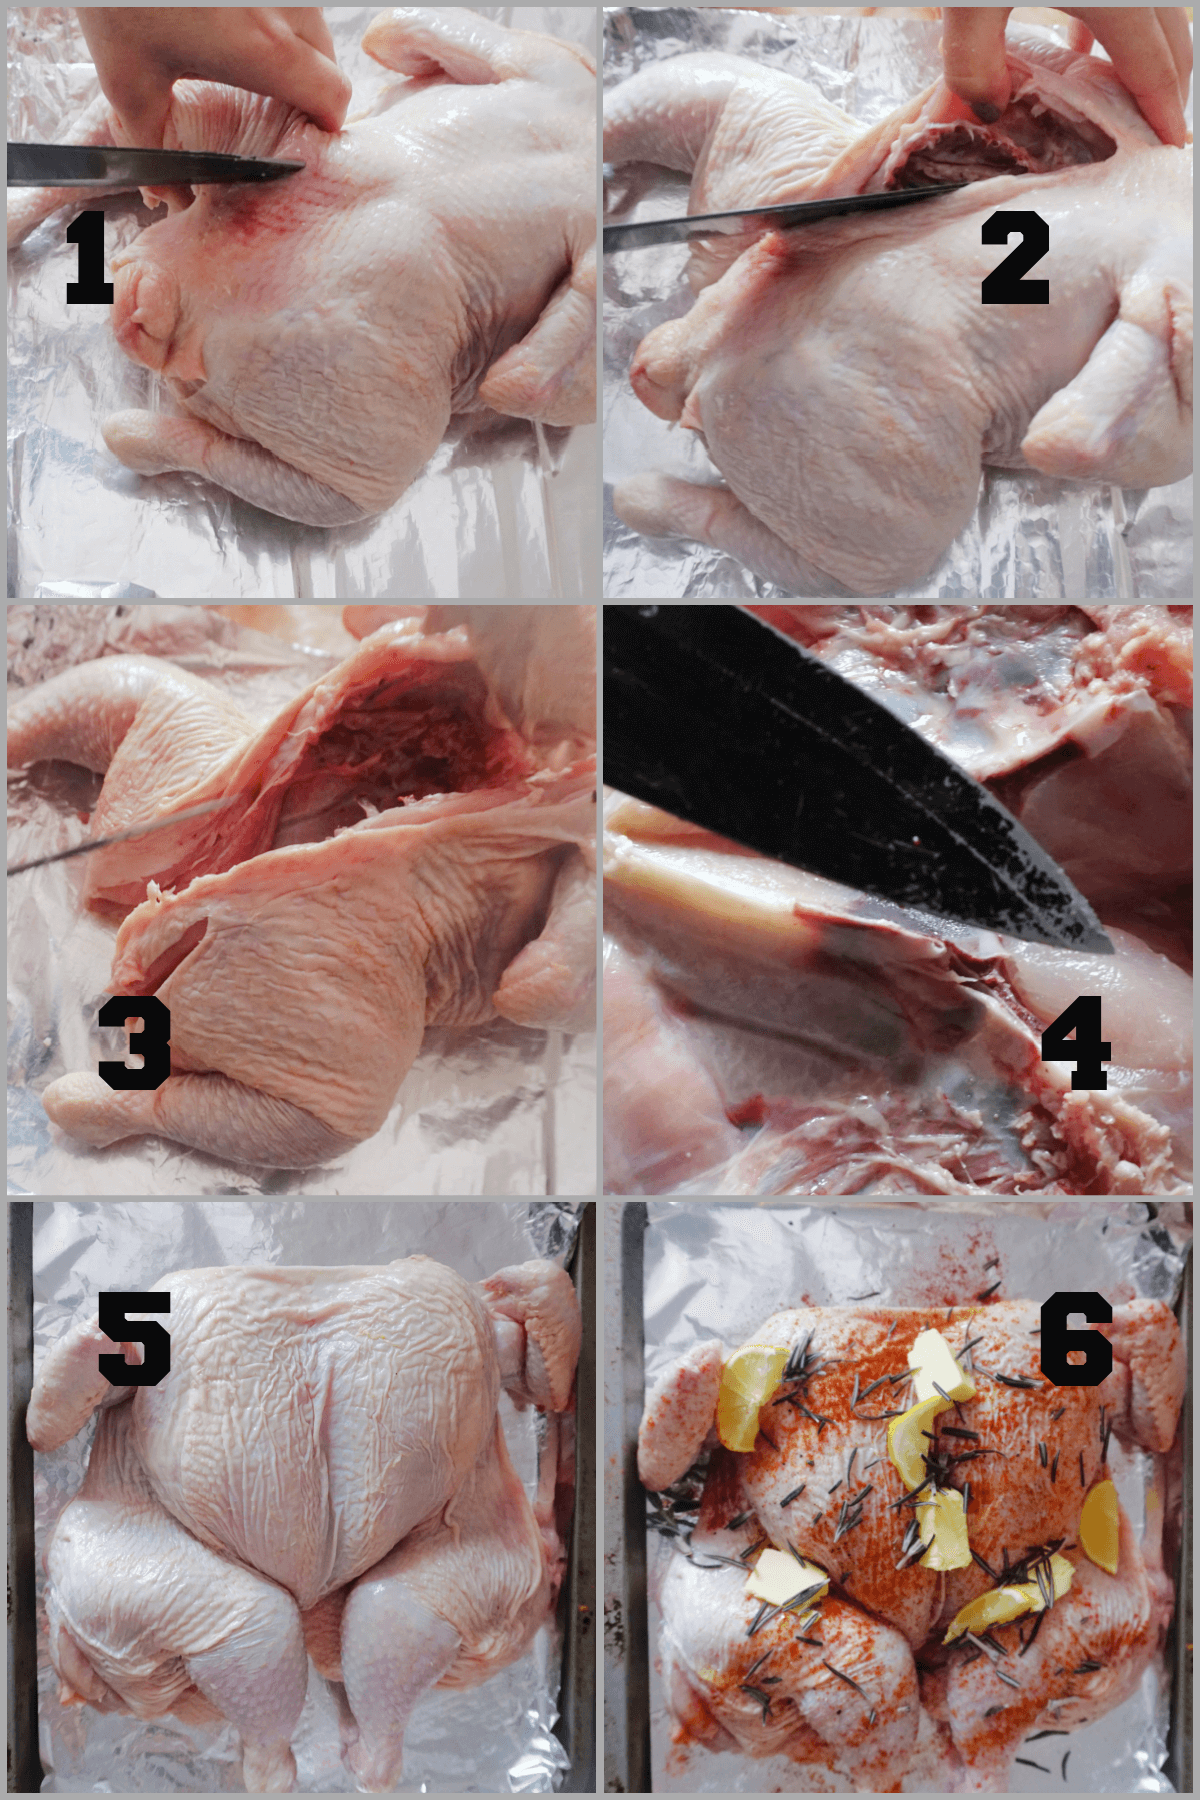 Collection of 6 photos to show how to sptachcock a chicken.